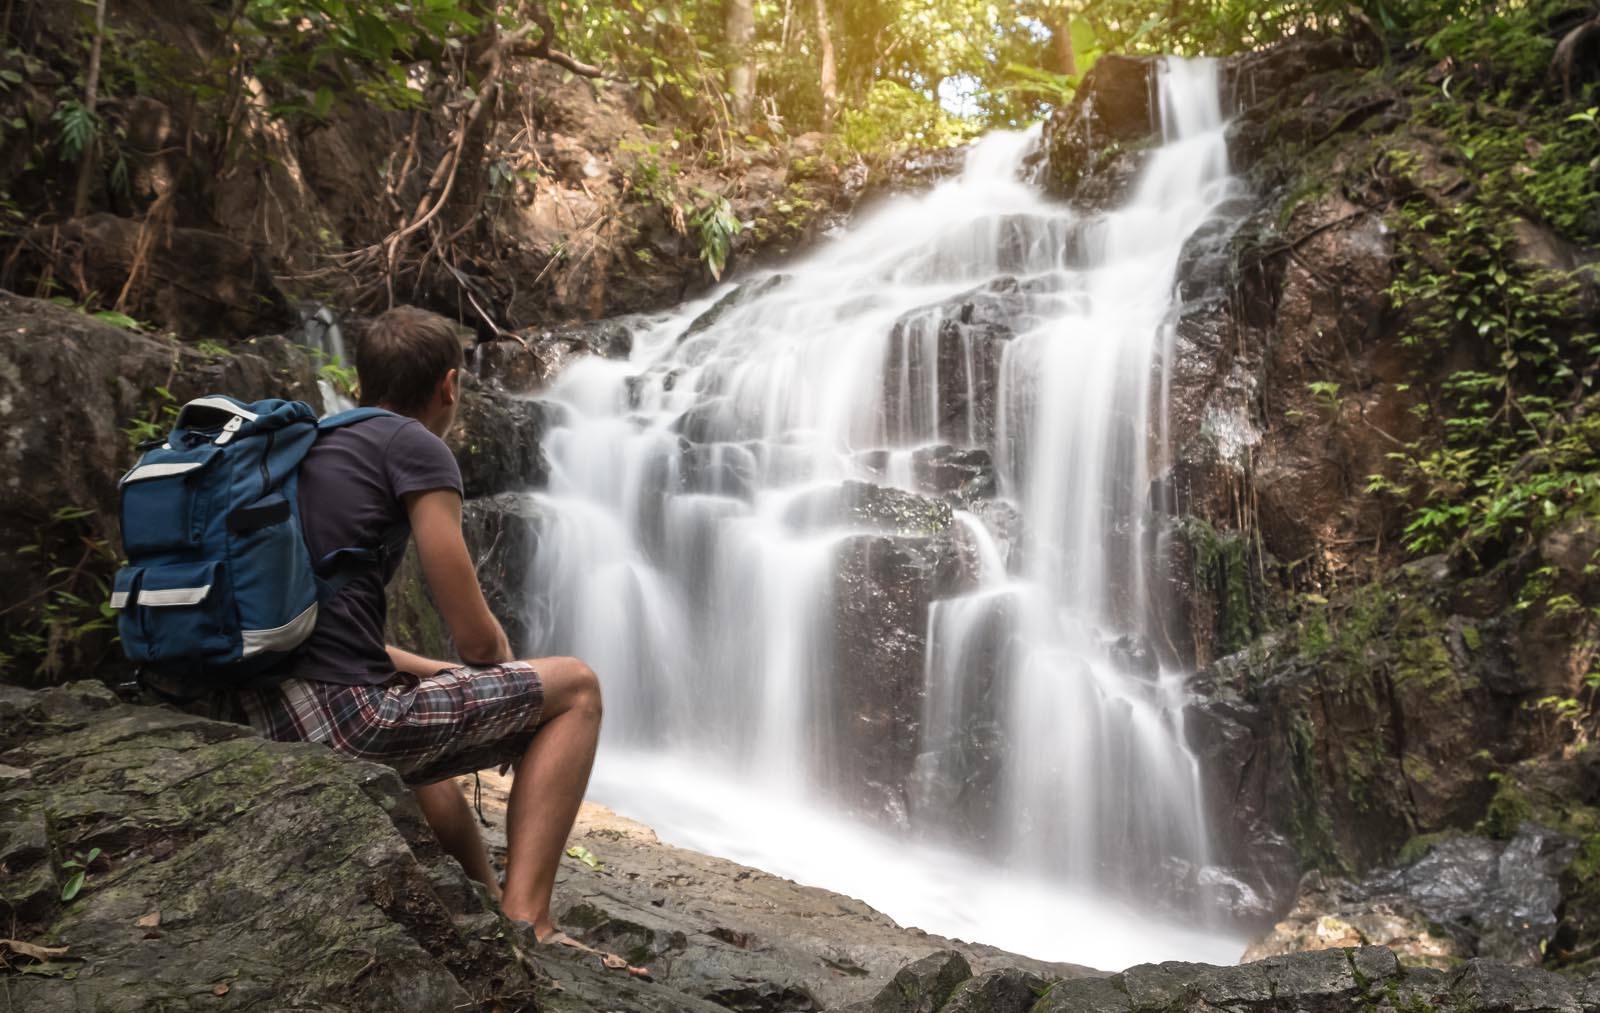 A man is sitting on the stone and looking on the Ton Sai waterfall in Phuket Thailand